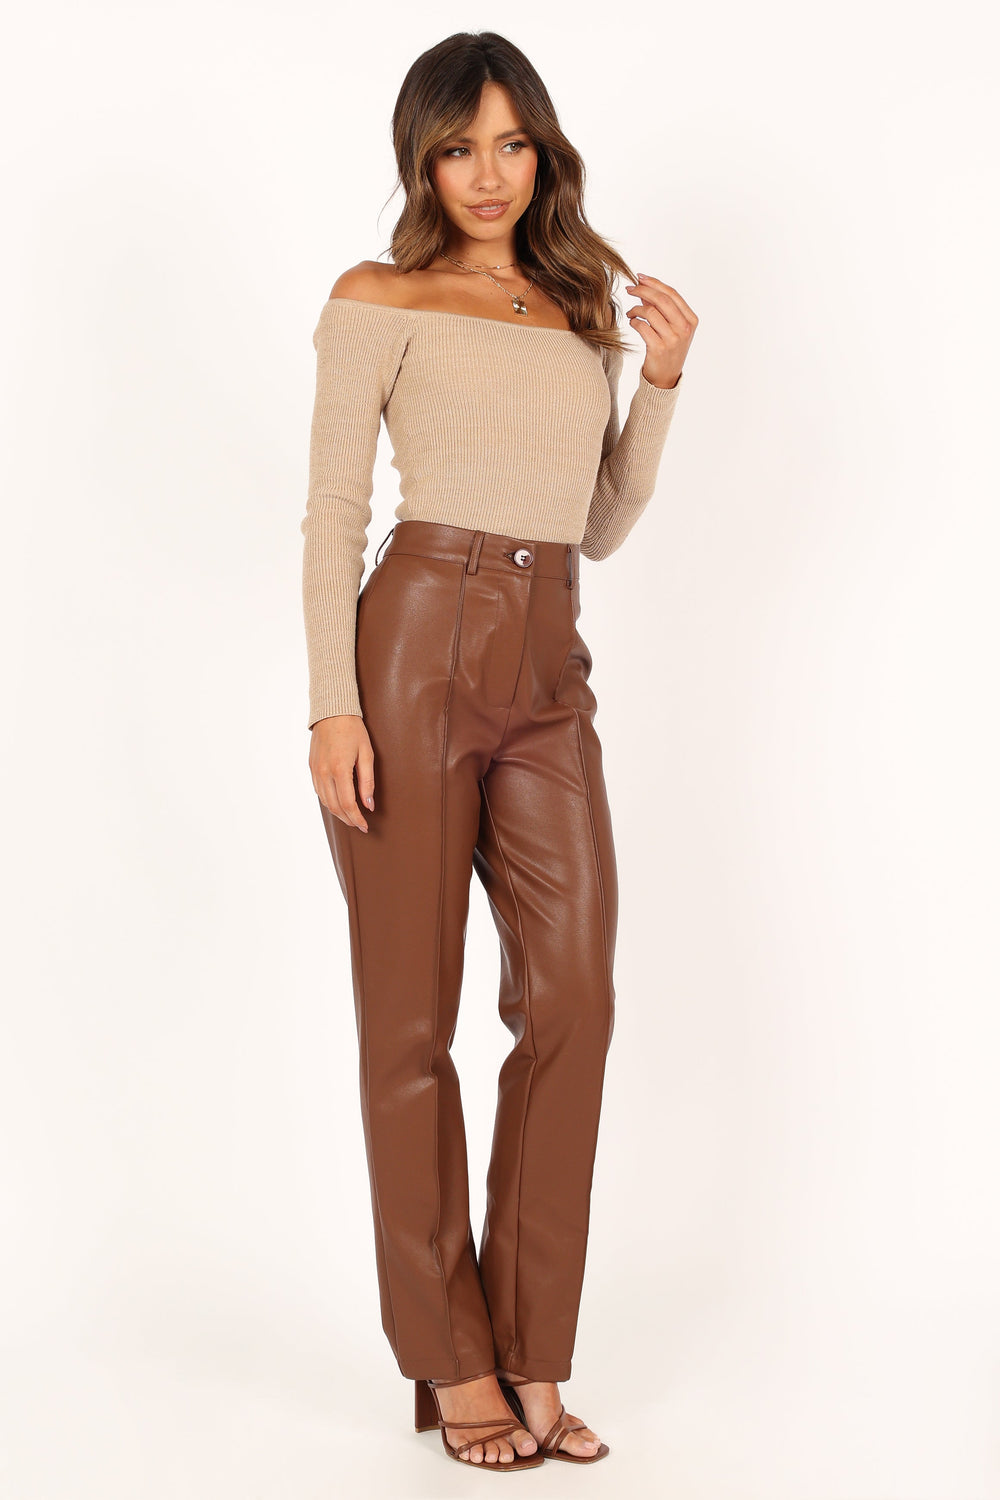 Petal and Pup USA BOTTOMS Sandy Faux Leather Pants - Chocolate Brown